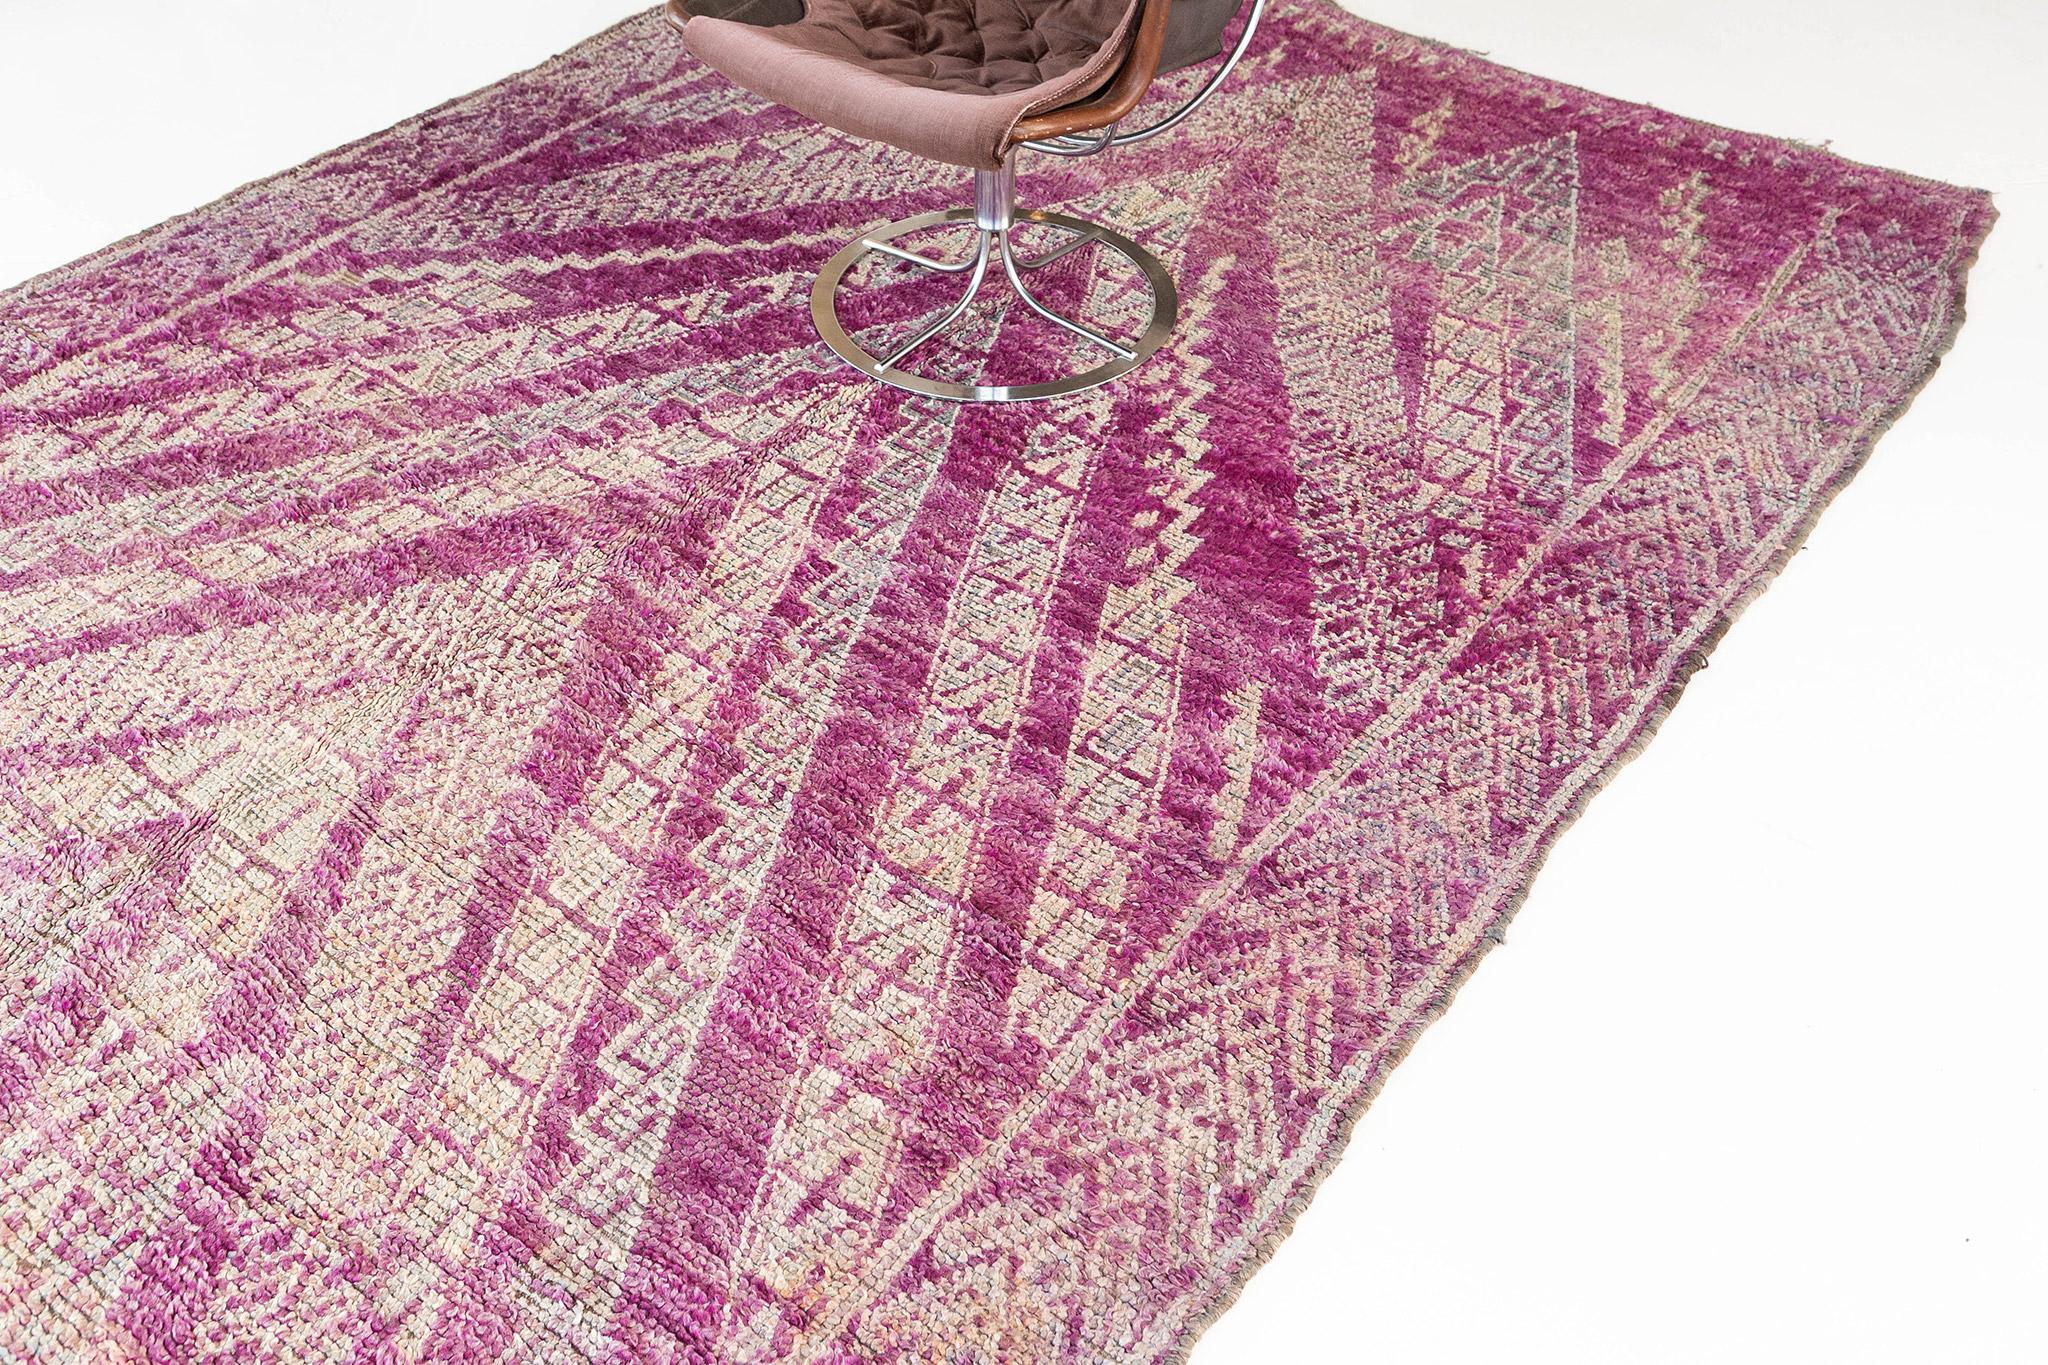 Characteristic of the Beni M’Guild, this rug features a vivid magenta field with traditional jutting chevron shapes of charcoal and taupe outlined in ivory. Side borders repeat the V-shape at a smaller, denser scale. A unique and fascinating vintage